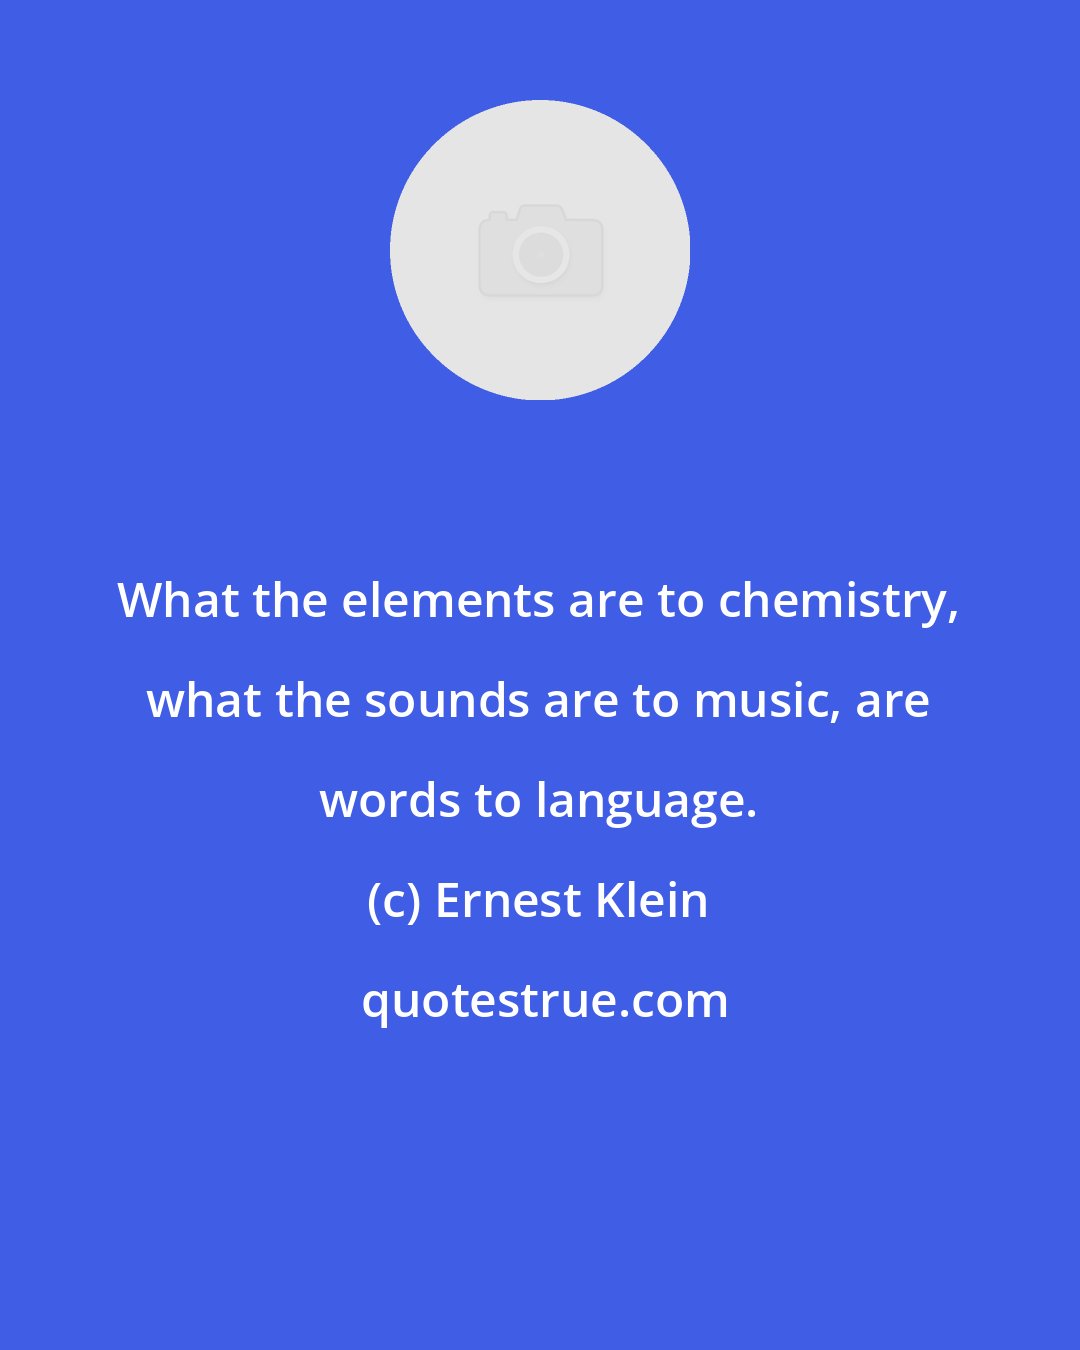 Ernest Klein: What the elements are to chemistry, what the sounds are to music, are words to language.